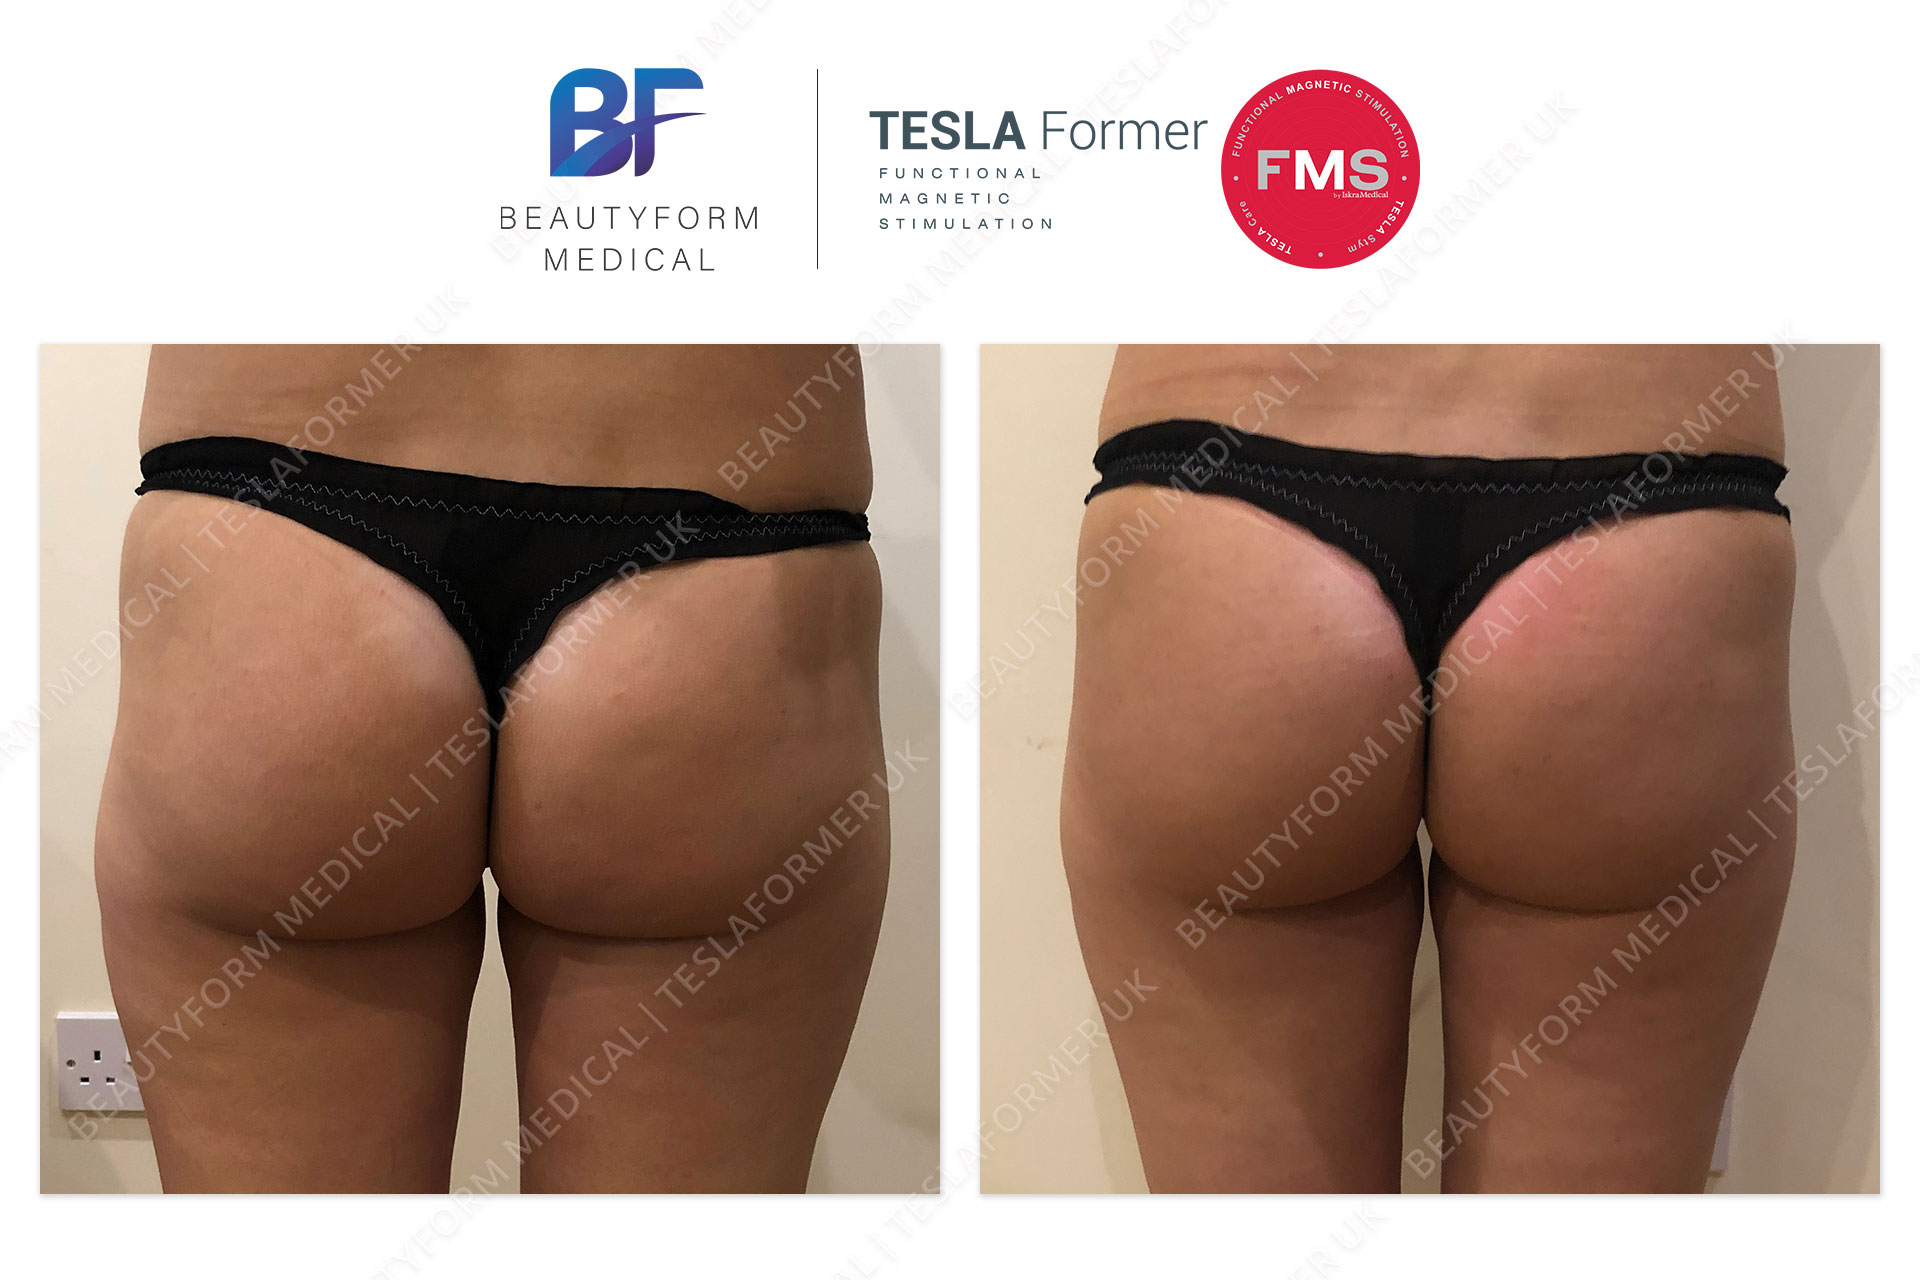 Tesla Former buttocks before and after photo